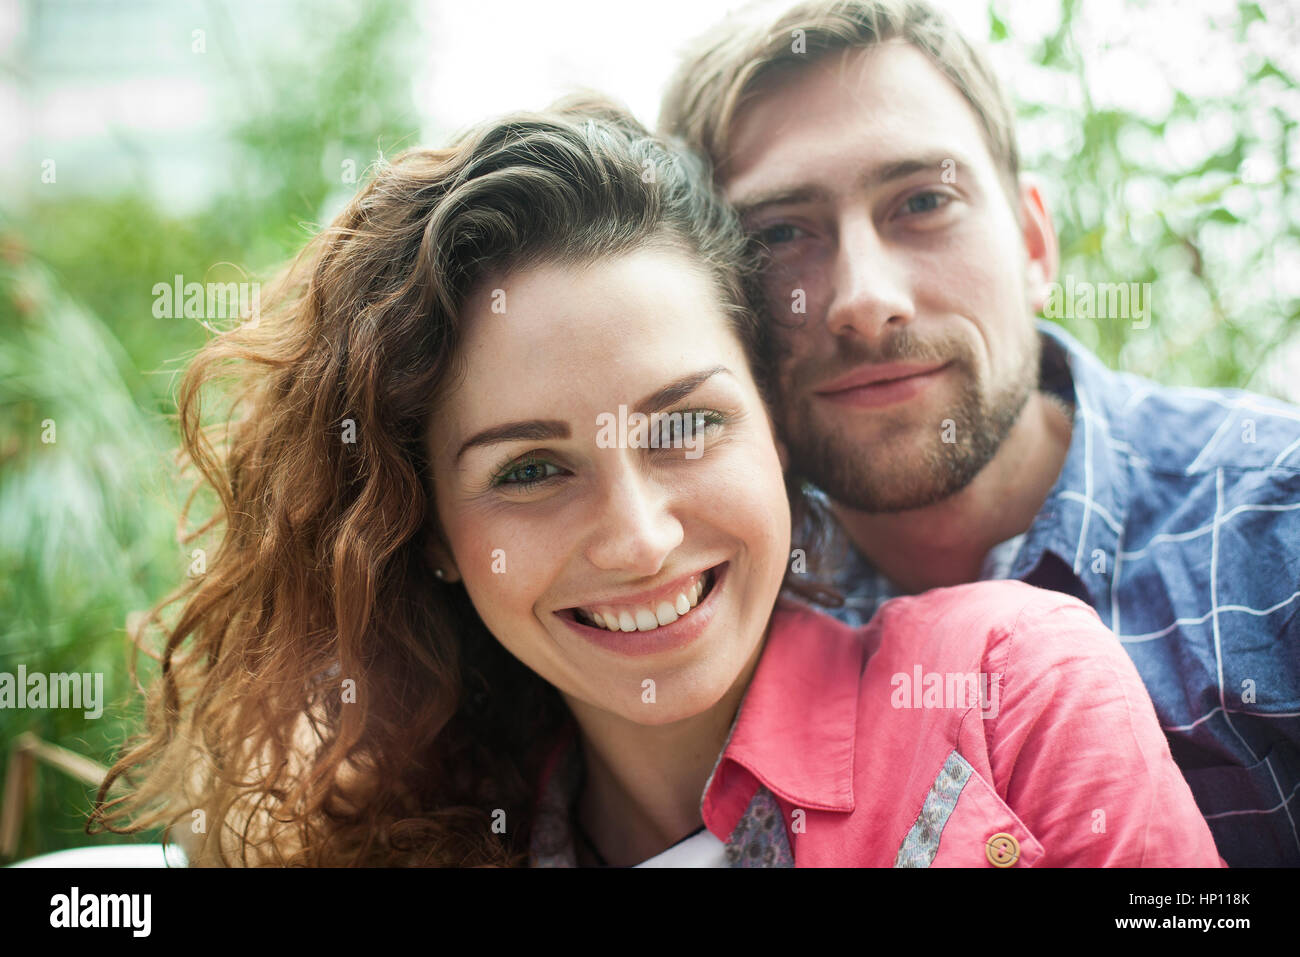 Couple together outdoors, portrait Stock Photo